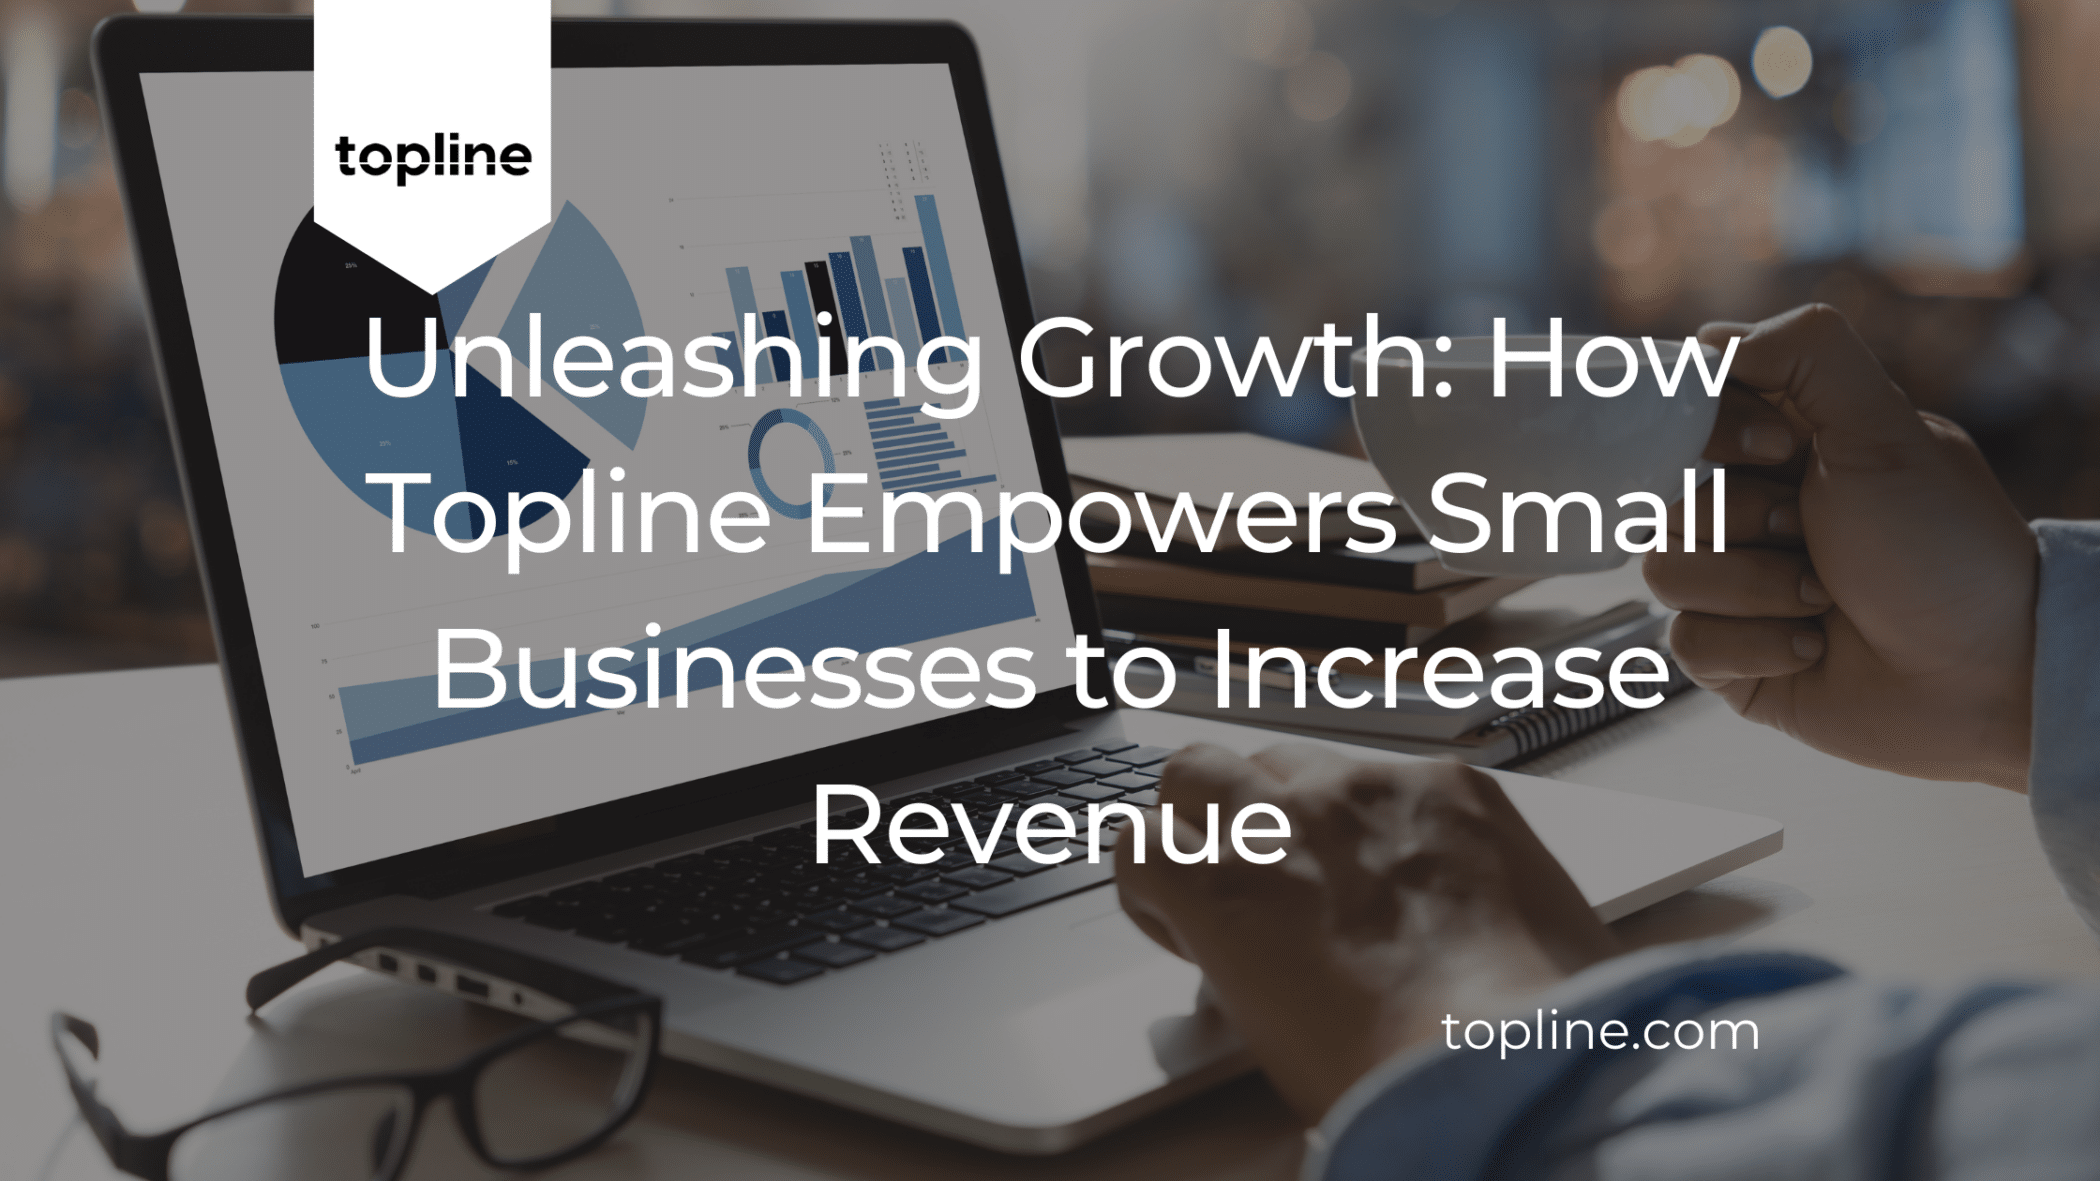 Unleashing Growth: How Topline Empowers Small Businesses to Increase Revenue